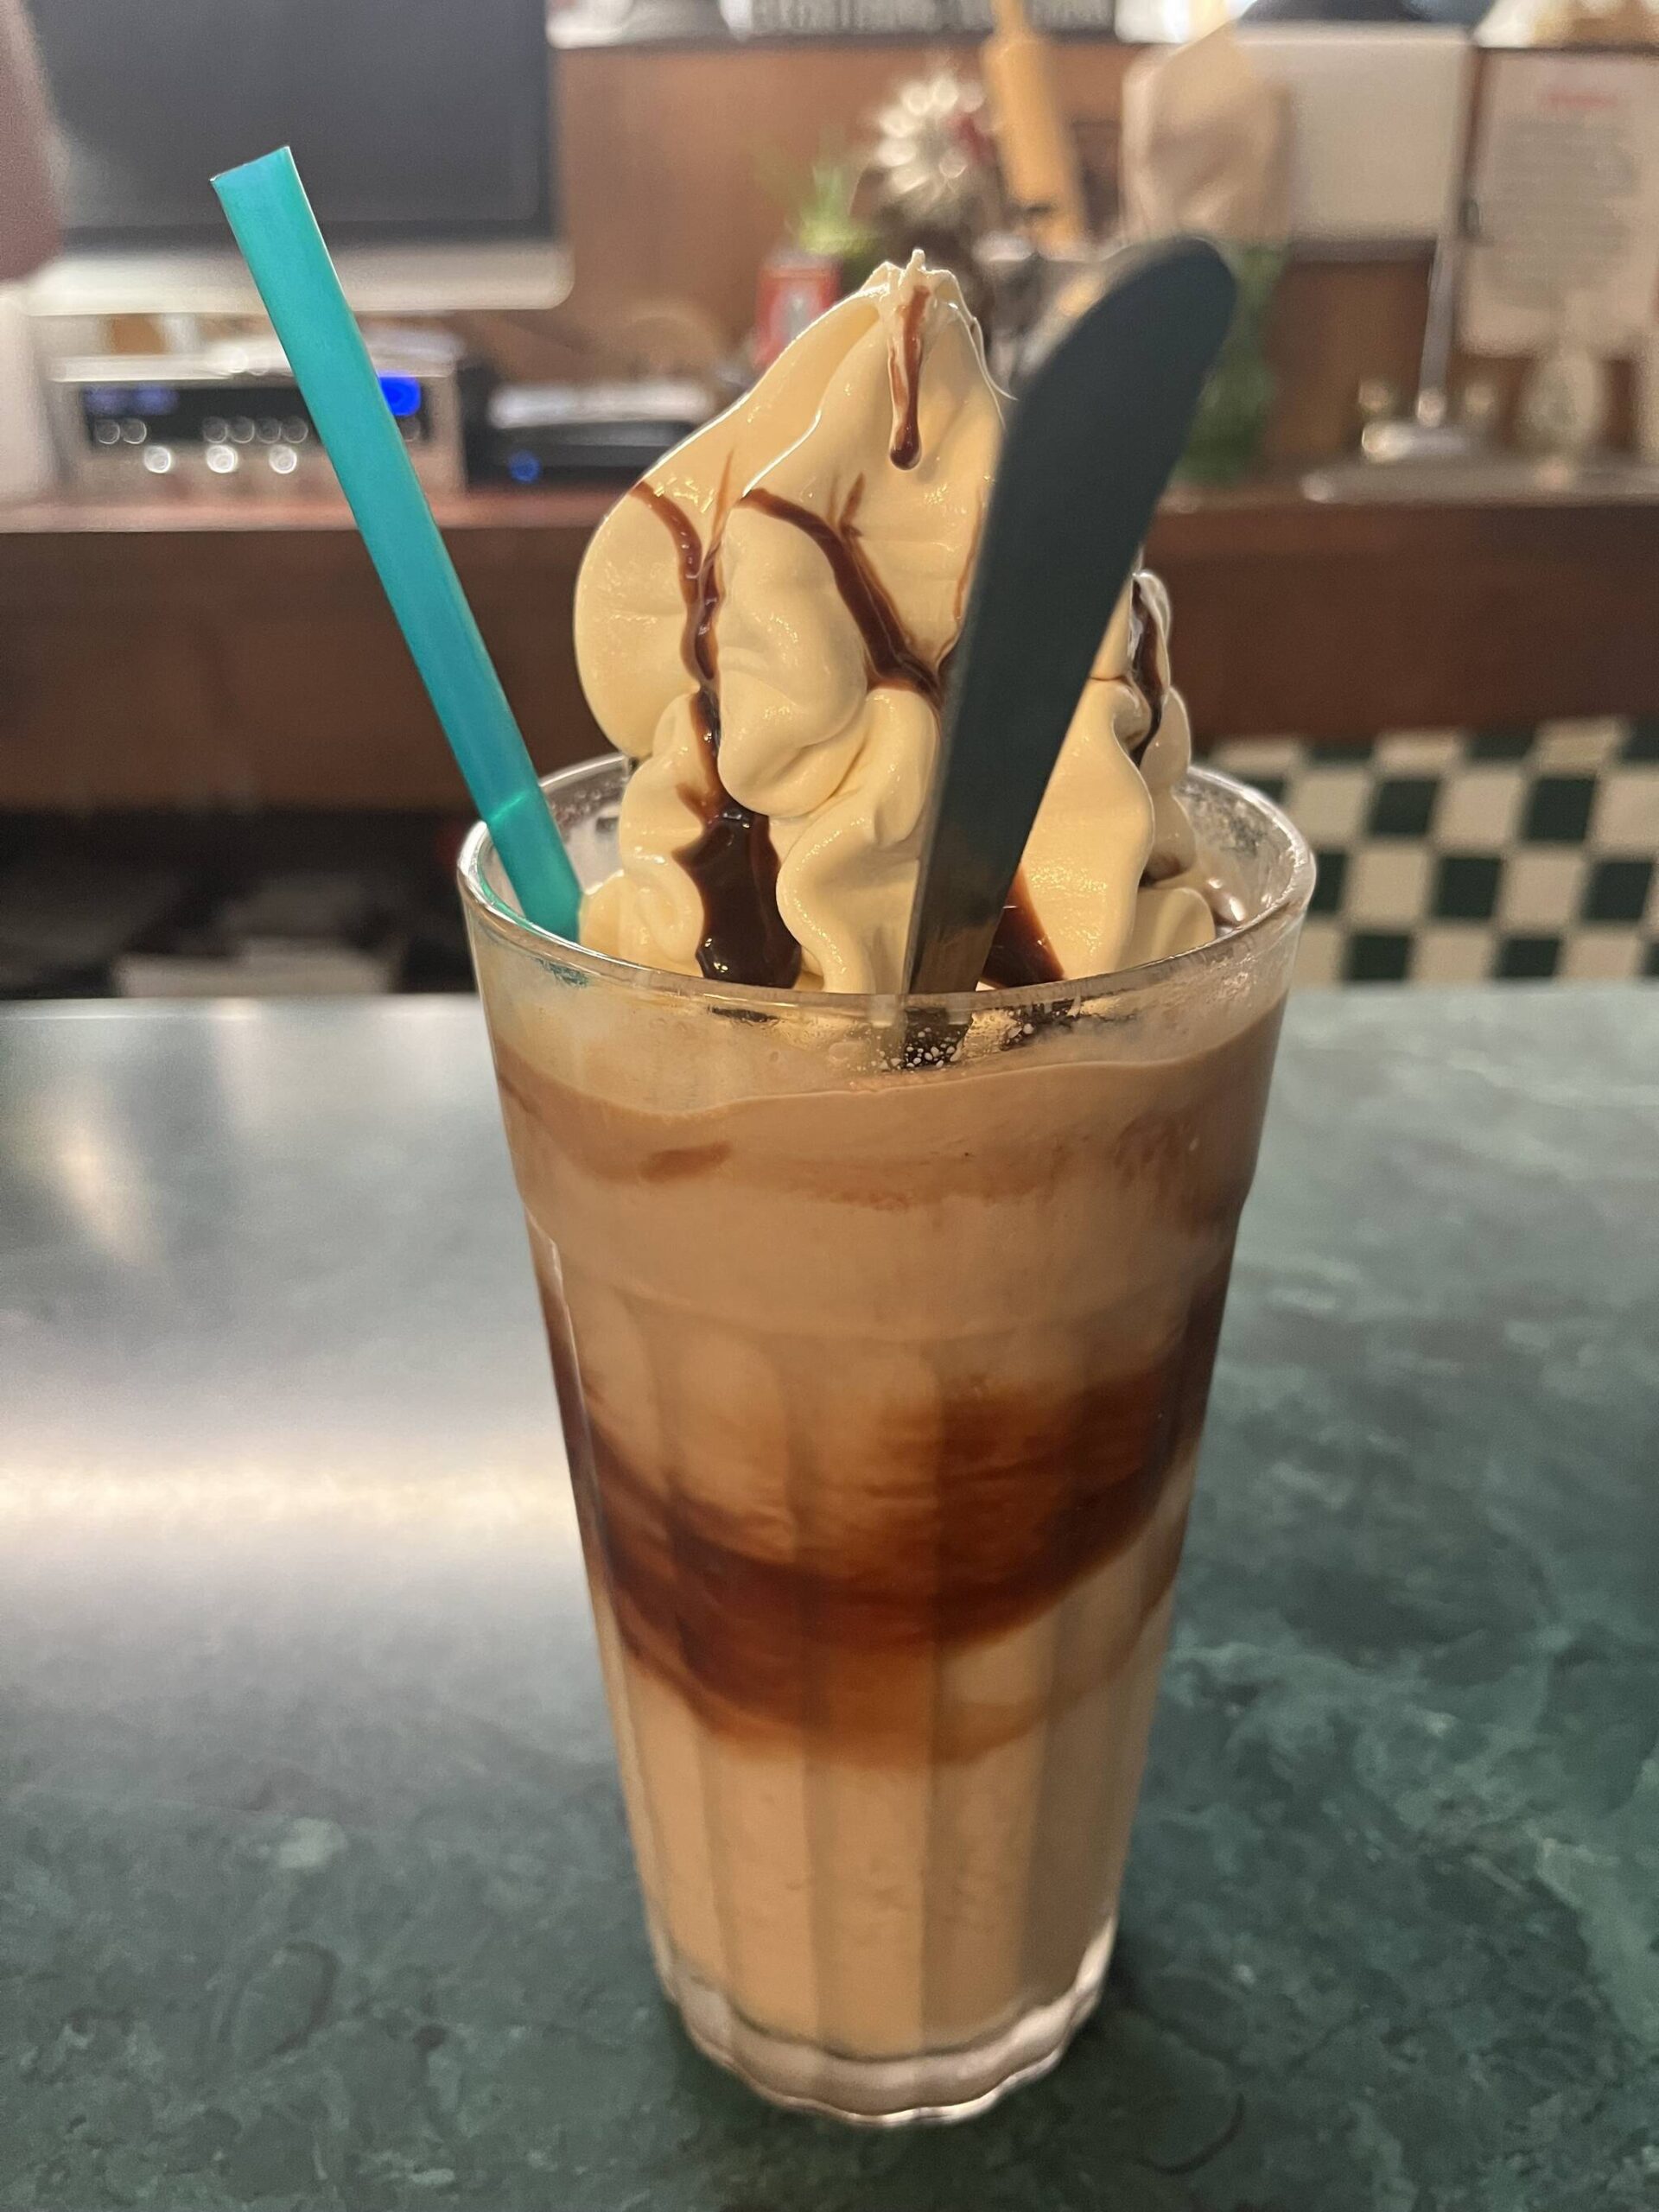 Matthew N. Wells / The Daily World
Come for the cheeseburger and fries. Stay for the milkshake, which is made with homemade ice cream. This 24-ounce chocolate milkshake is worth the price of admission at Clarks Restaurant.